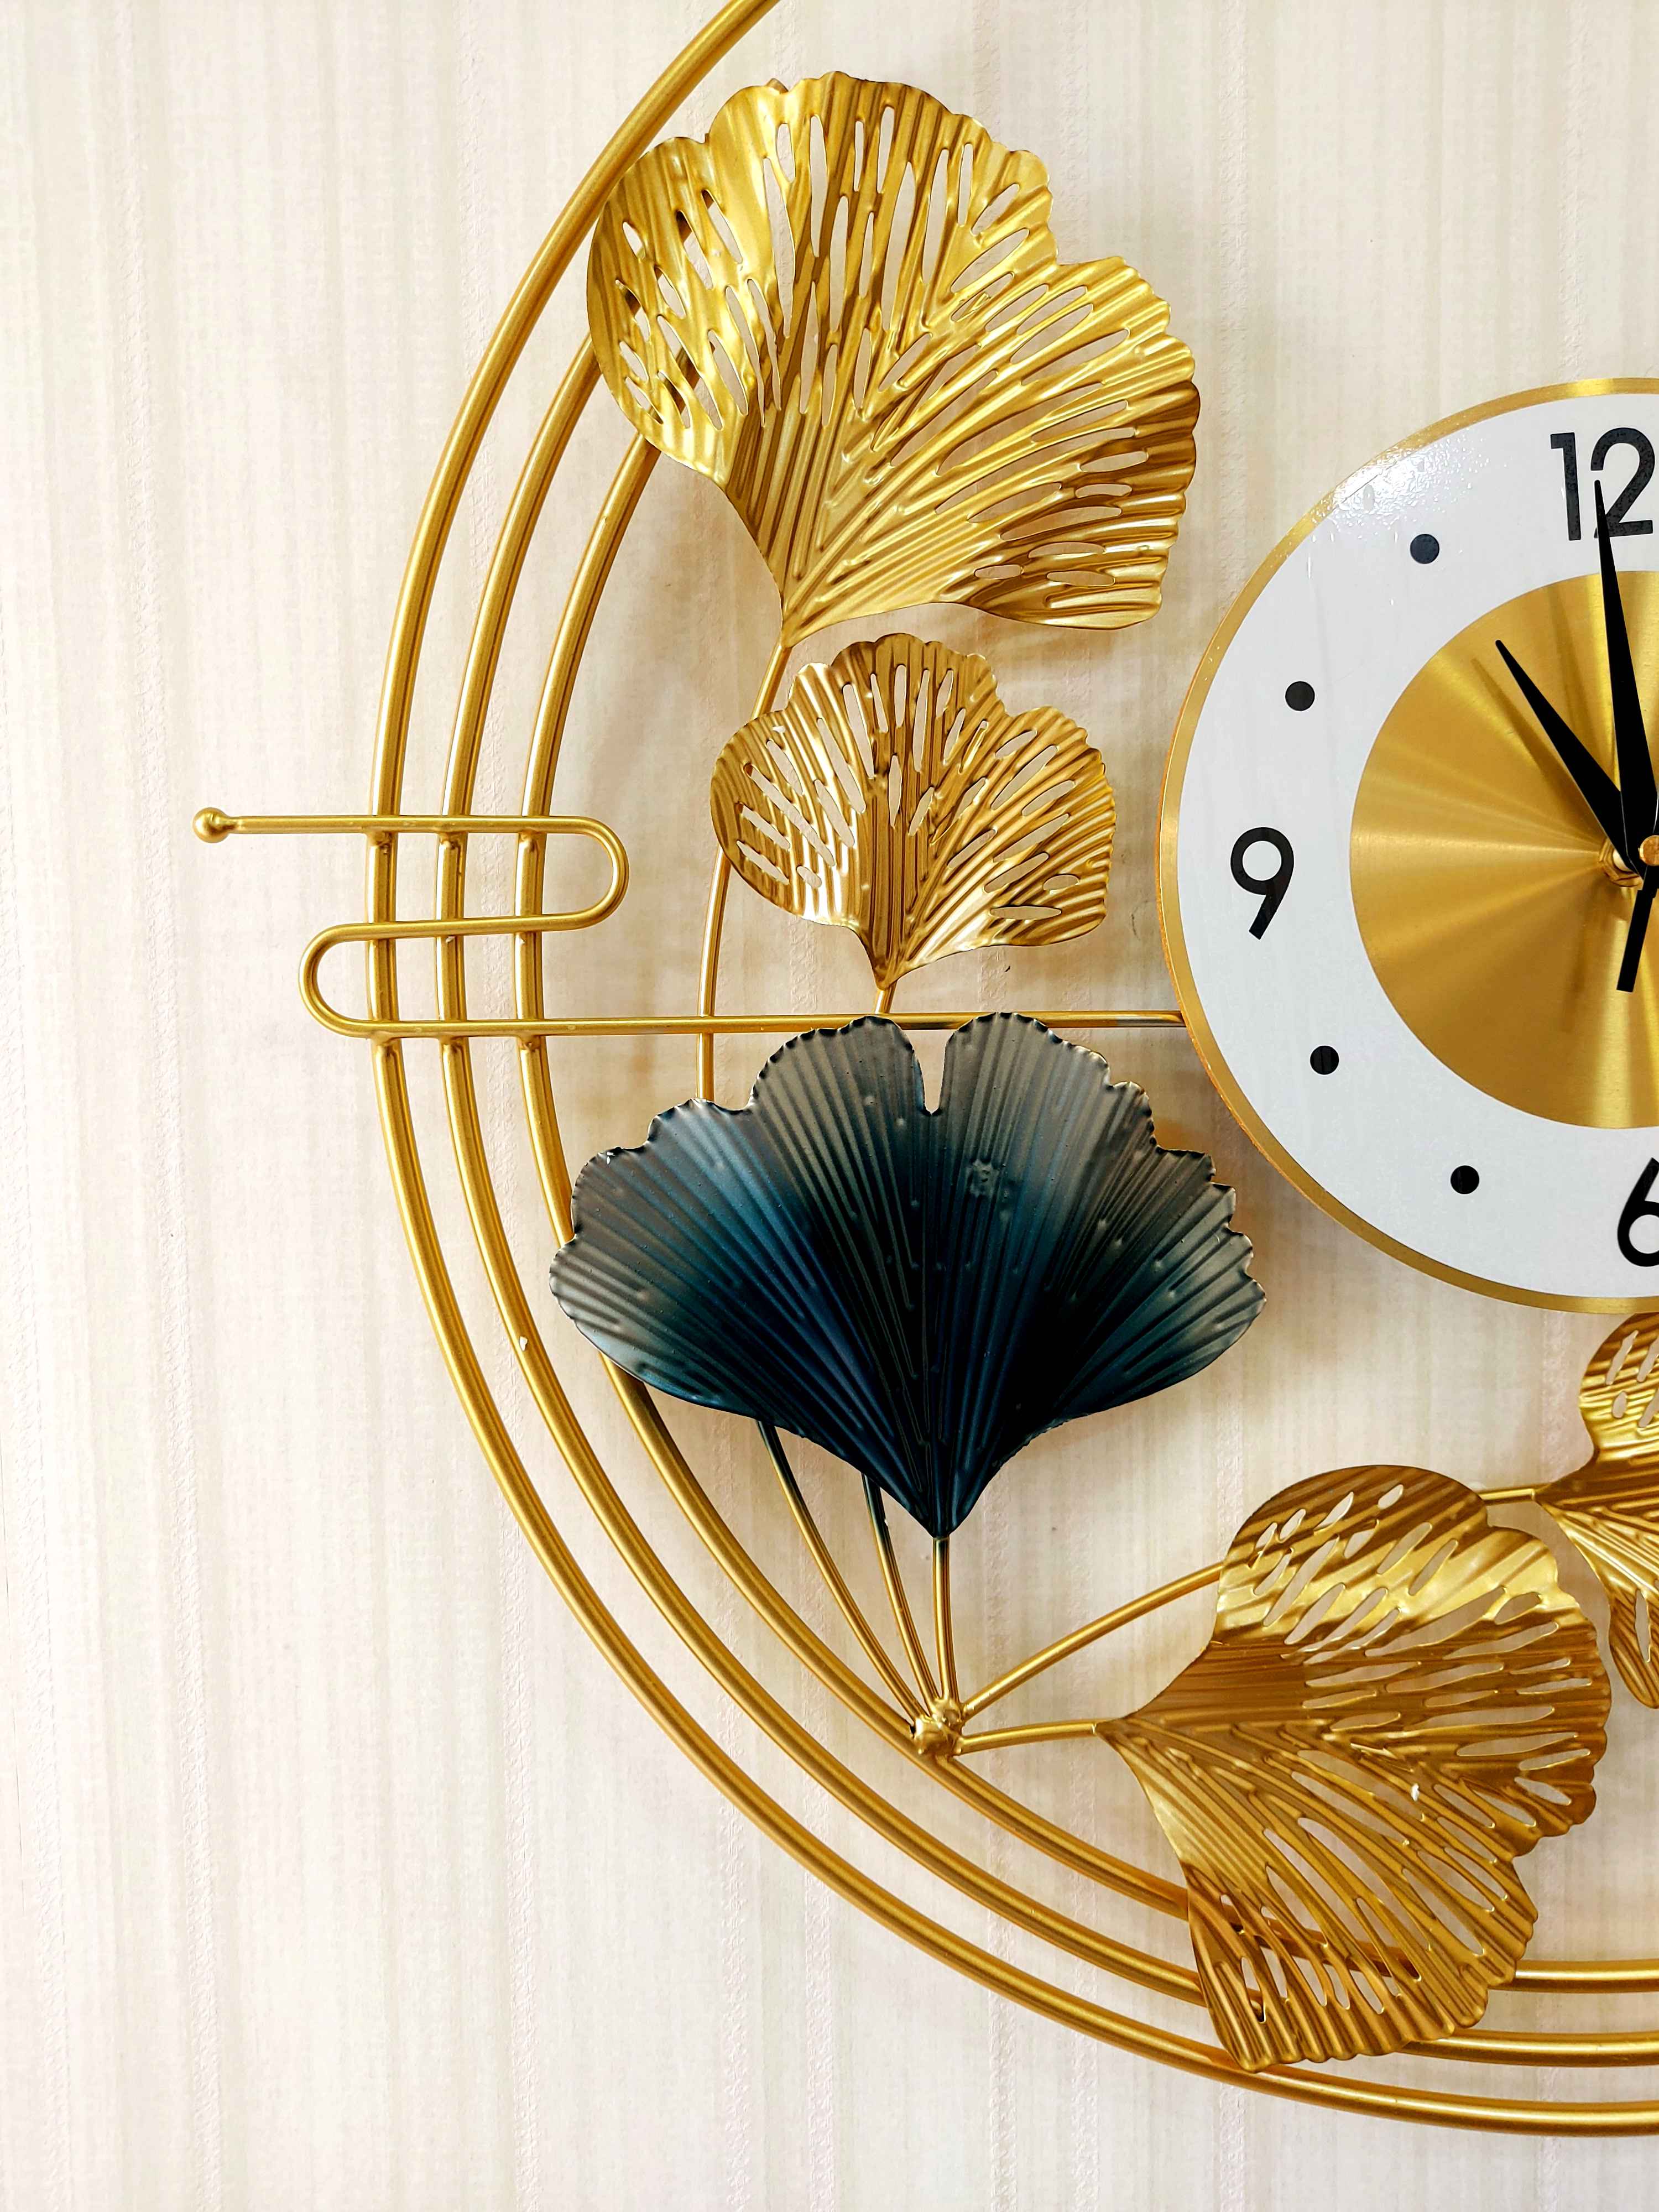 FunkyTradition Modern Minimalist Creative Colorful Leaf Shape Metal Wall Clock , Wall Watch , Wall Decor for Home Office Decor and Gifts 62 CM Tall